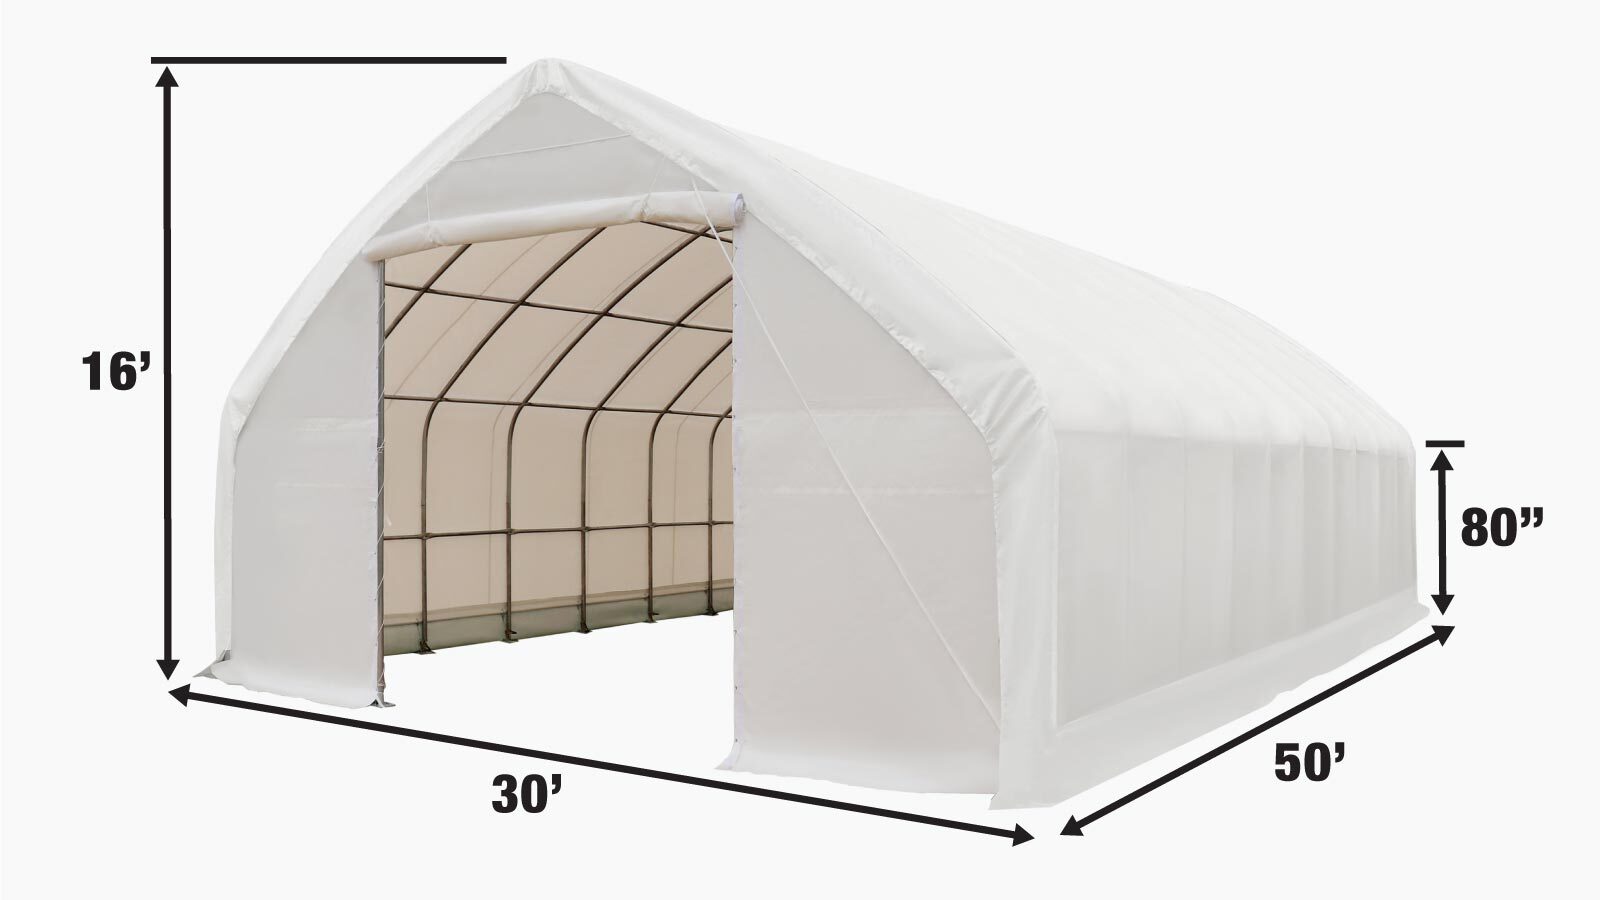 TMG Industrial 30' x 50' Straight Wall Peak Ceiling Storage Shelter with Heavy Duty 17 oz PVC Cover & Drive Through Doors, TMG-ST3050V-specifications-image